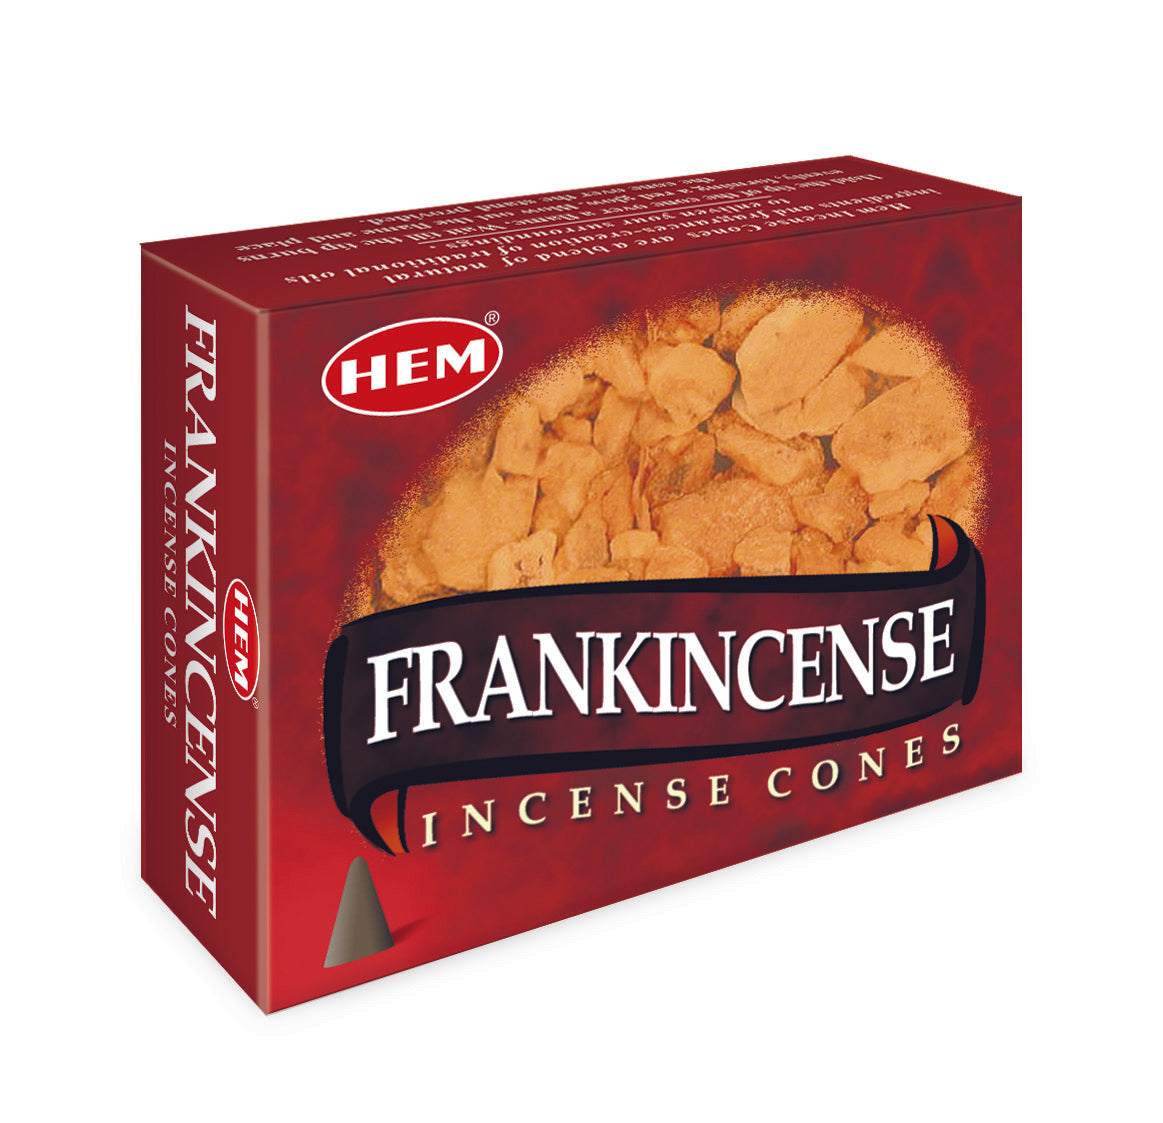 Frankincense Incense Cones 12 packets of 10 cones Each